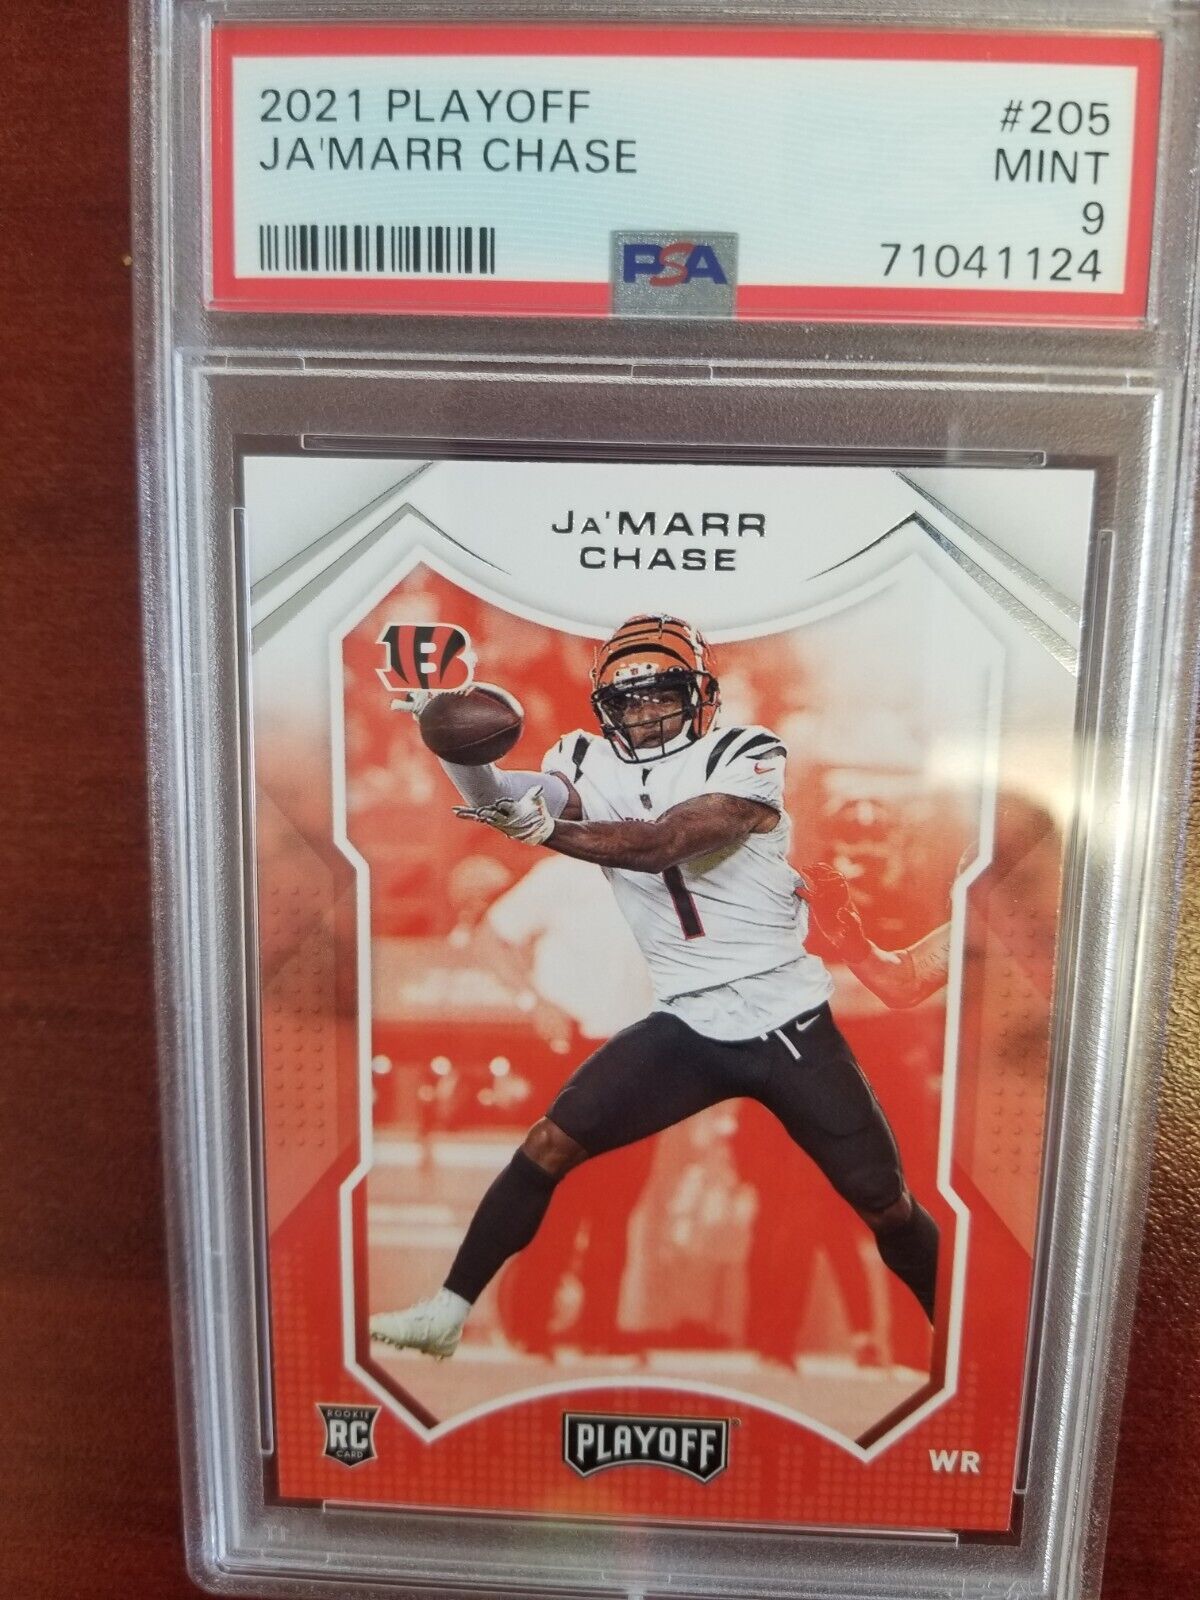 2021 PANINI PLAYOFF JAMARR CHASE #205 PSA 9 MINT CONDITION ROOKIE CARD BENGALS🏈